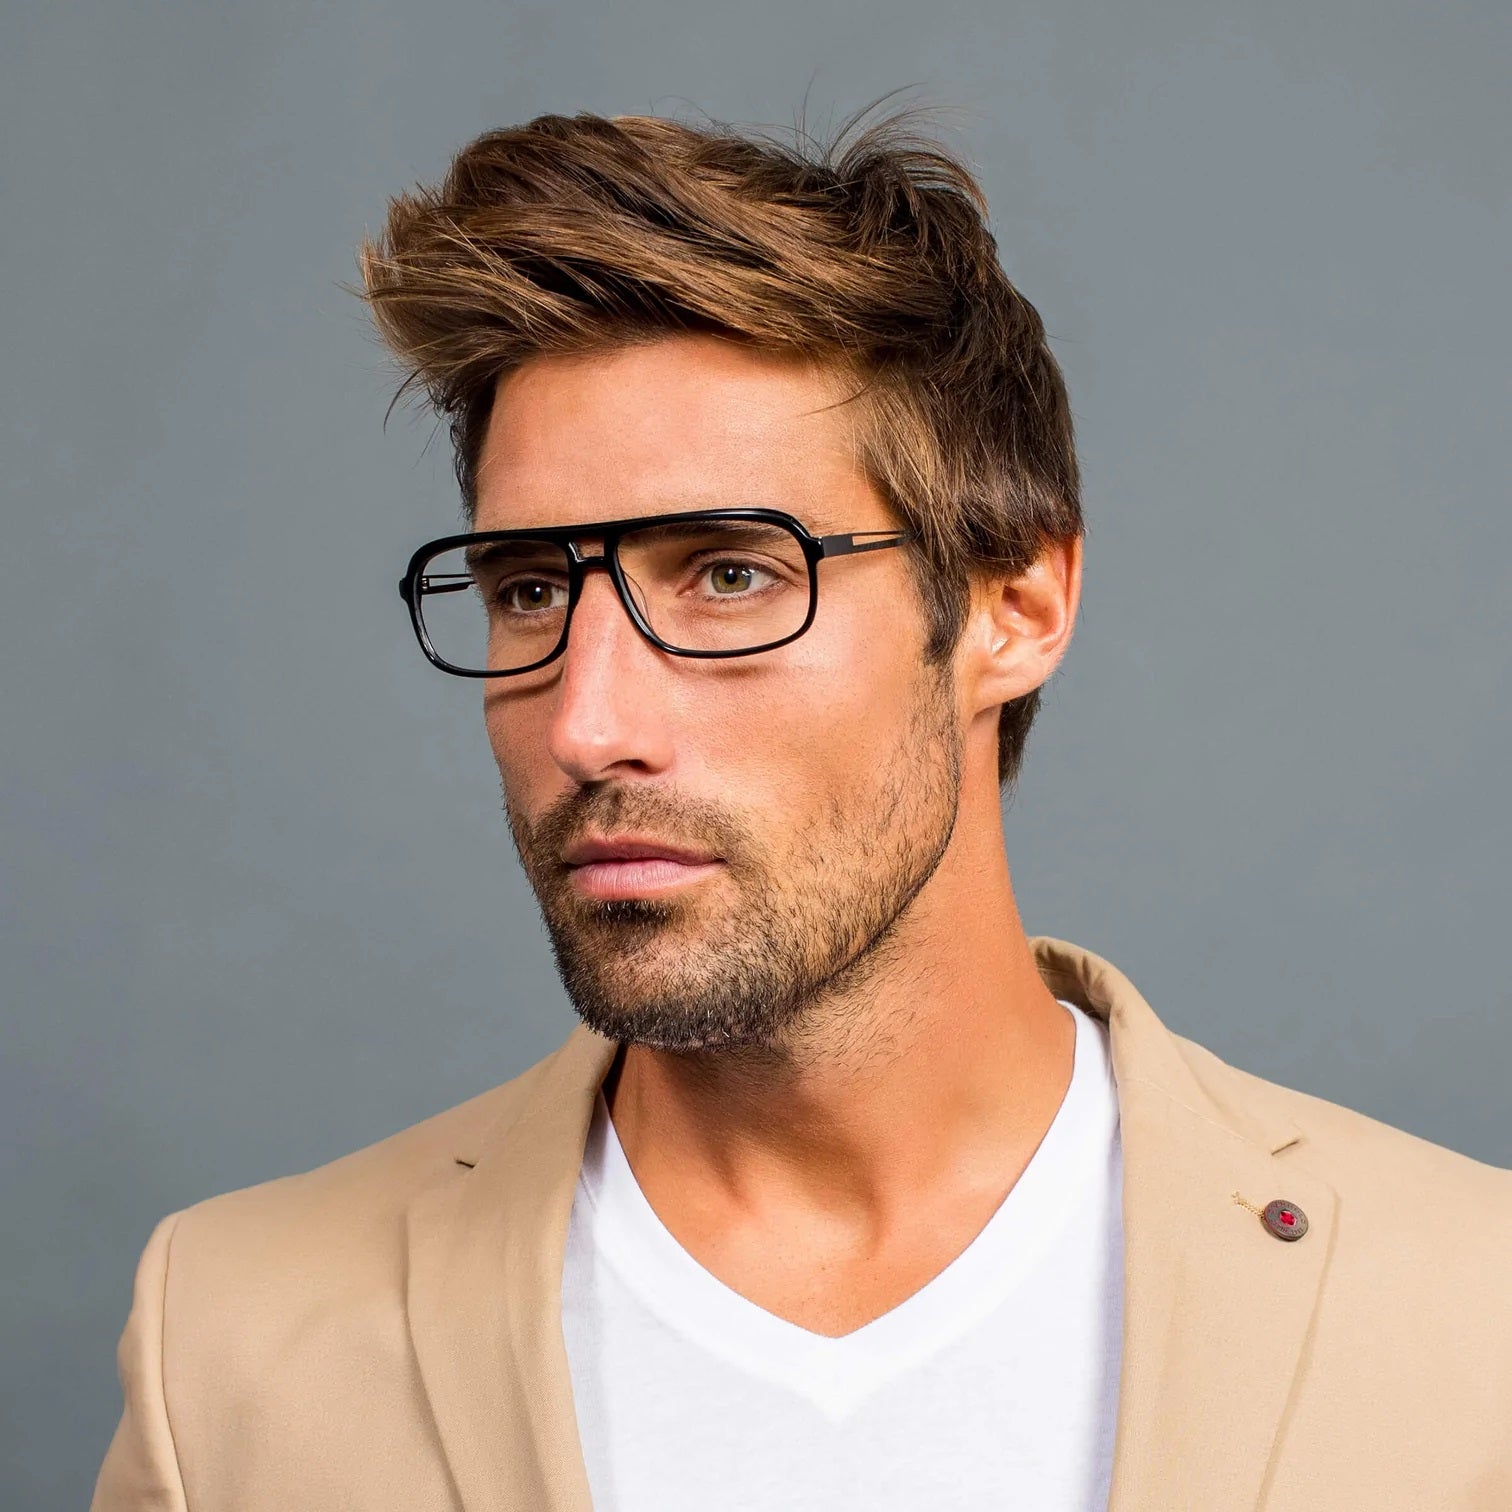 5 Frame Trends For Men That You Need To Look Out For!